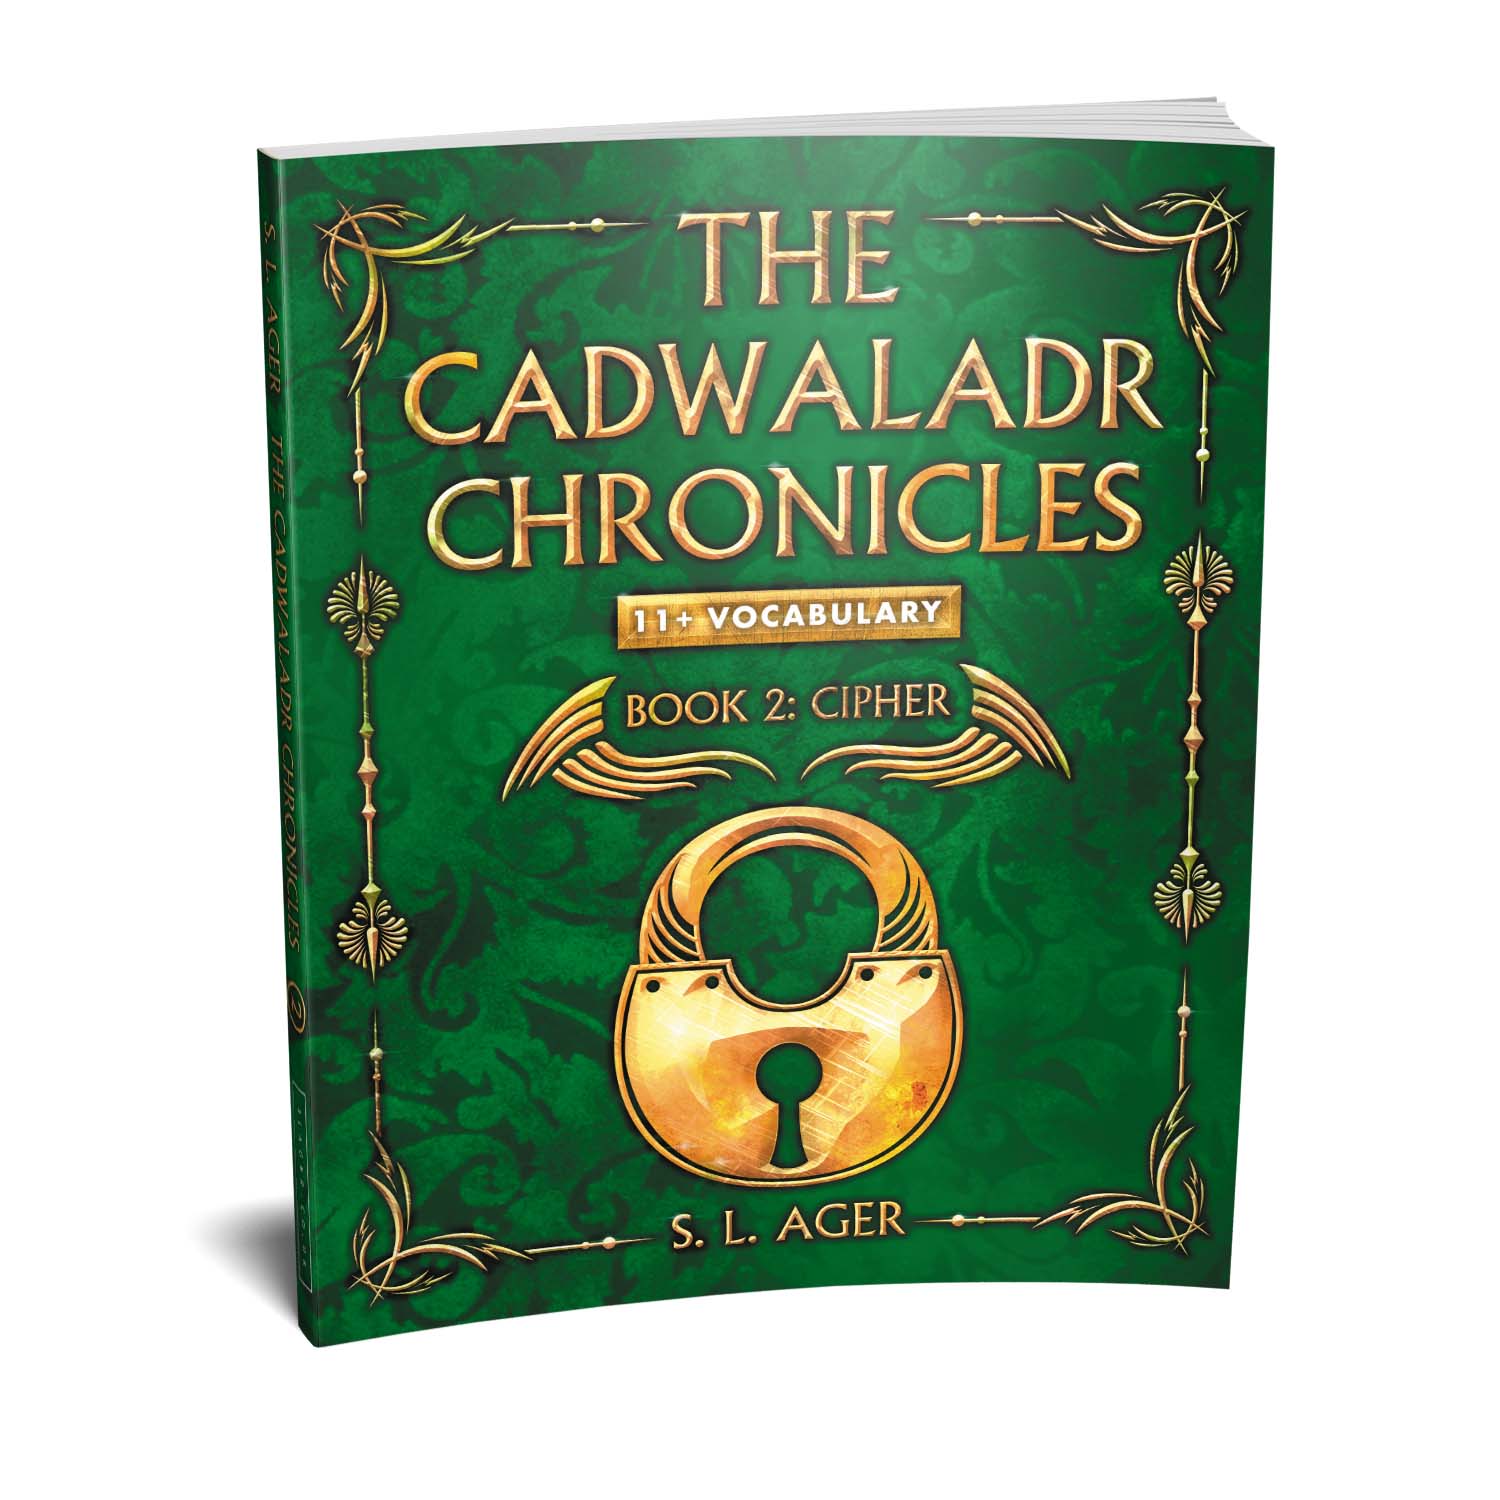 'The Cadwaladr Chronicles' is unique, story-based, educational novel series that teaches young readers nearly 3000 exam-level English words. The author is S L Ager. The book cover and interior design are by Mark Thomas. To learn more about what Mark could do for your book, please visit coverness.com.